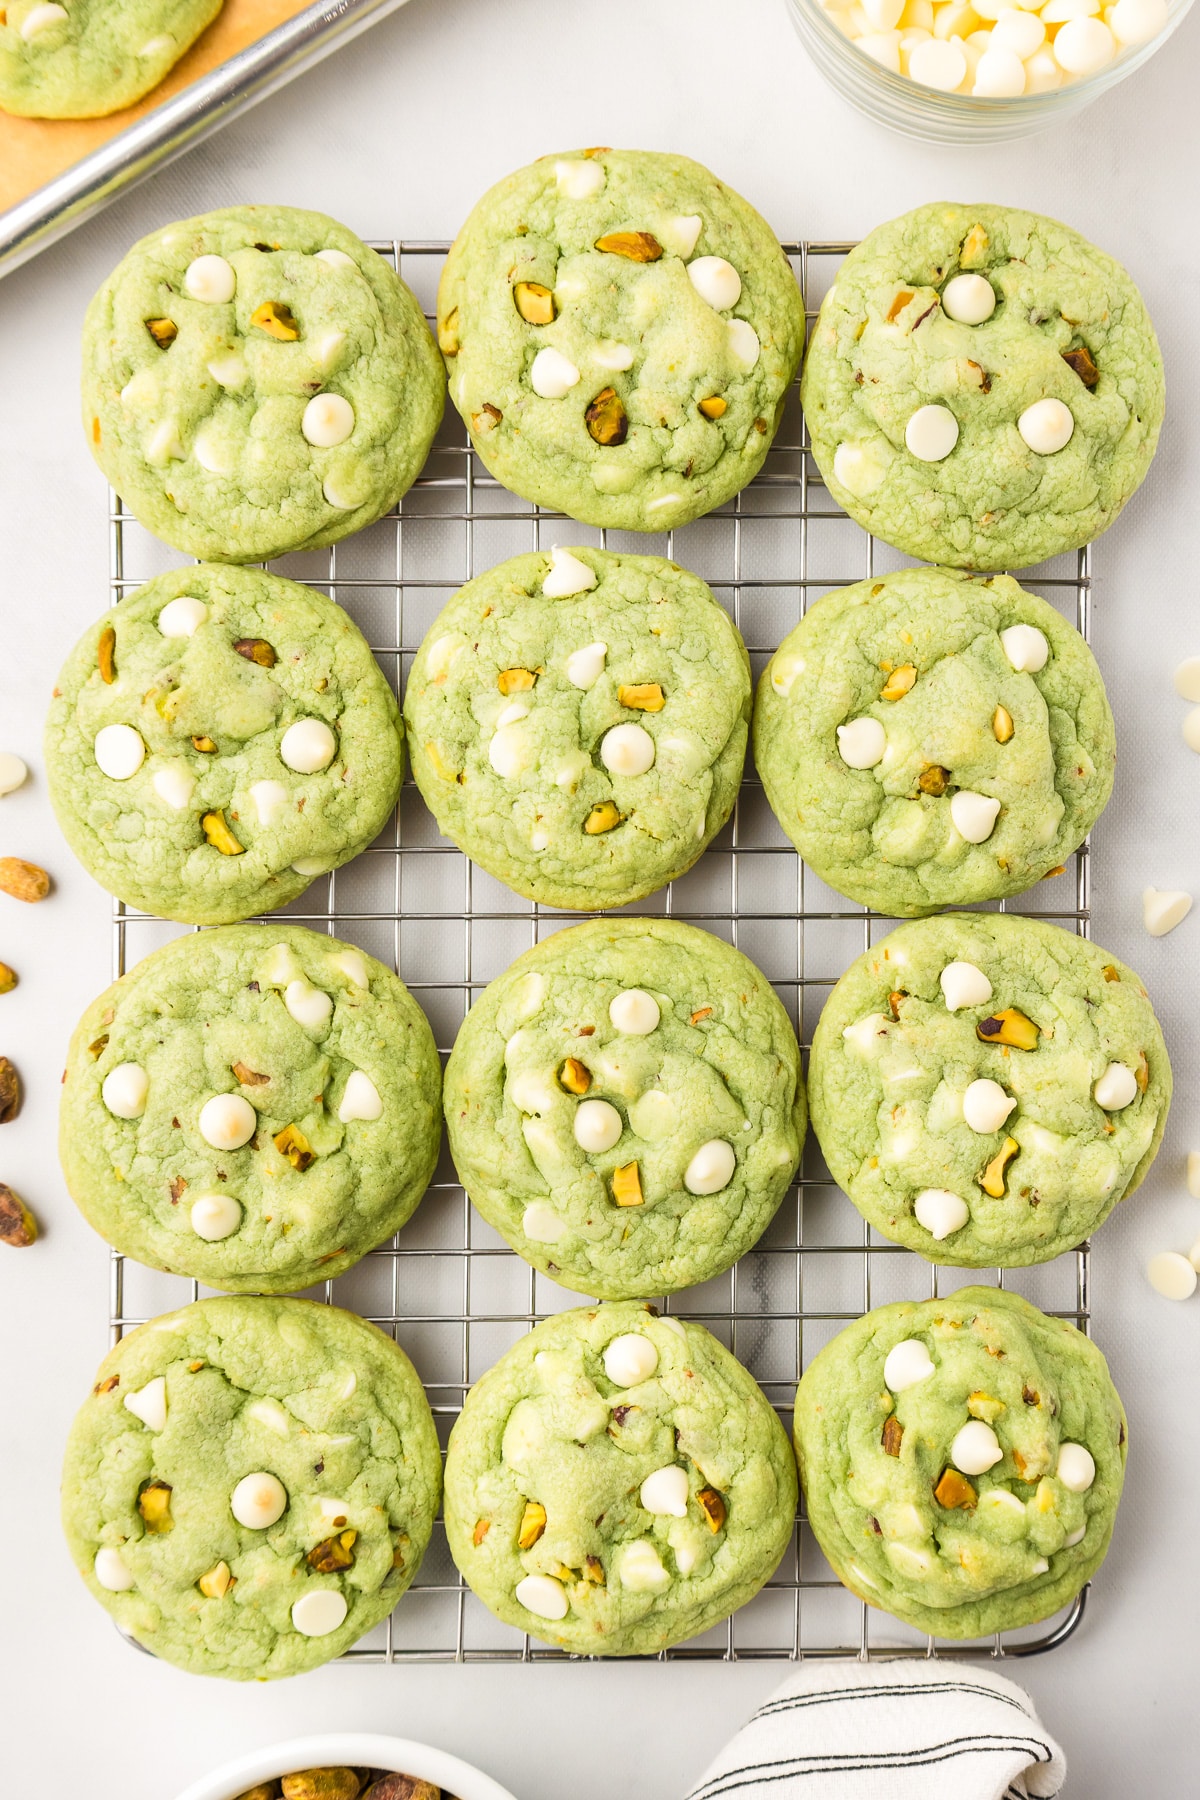 Green pistachio cookies with white chocolate chips on a cooling wire rack from above.